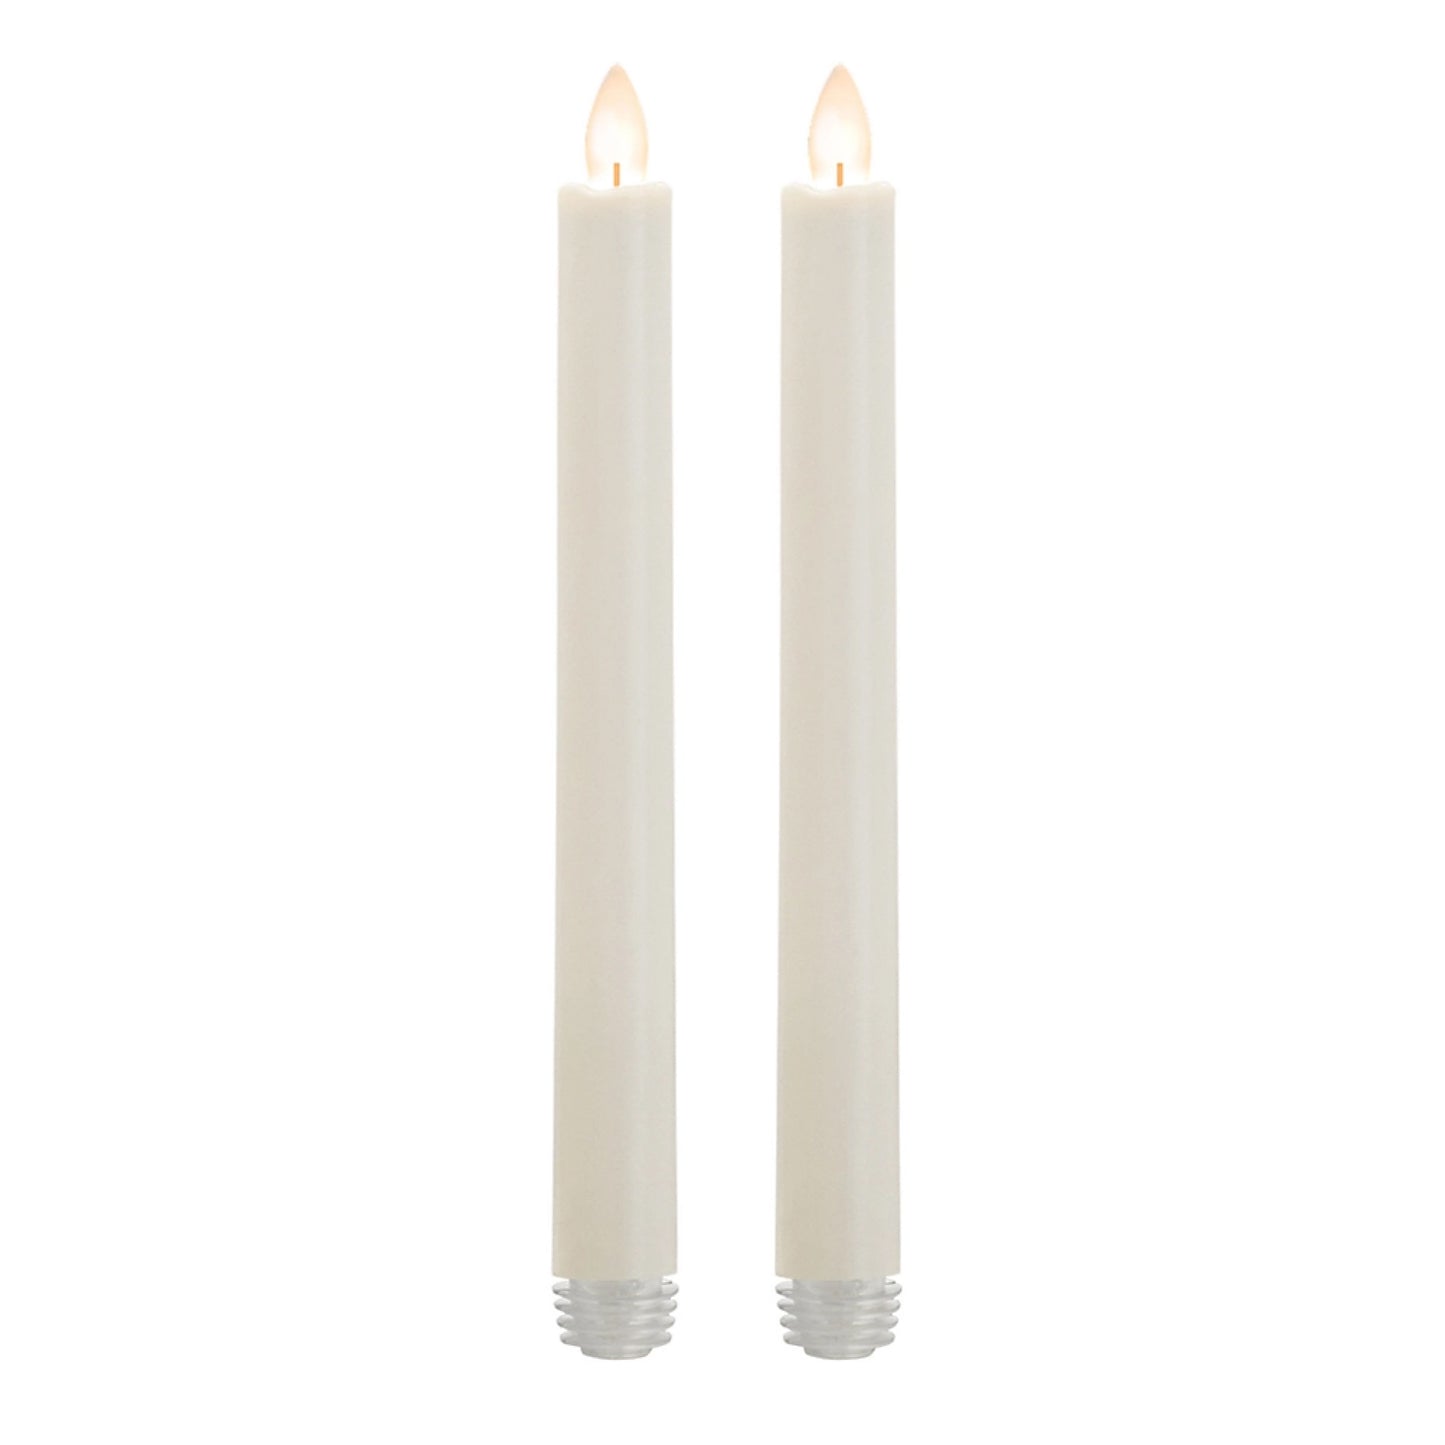 Sullivan's LED Battery Operated Wax Taper Candles - Set of 2